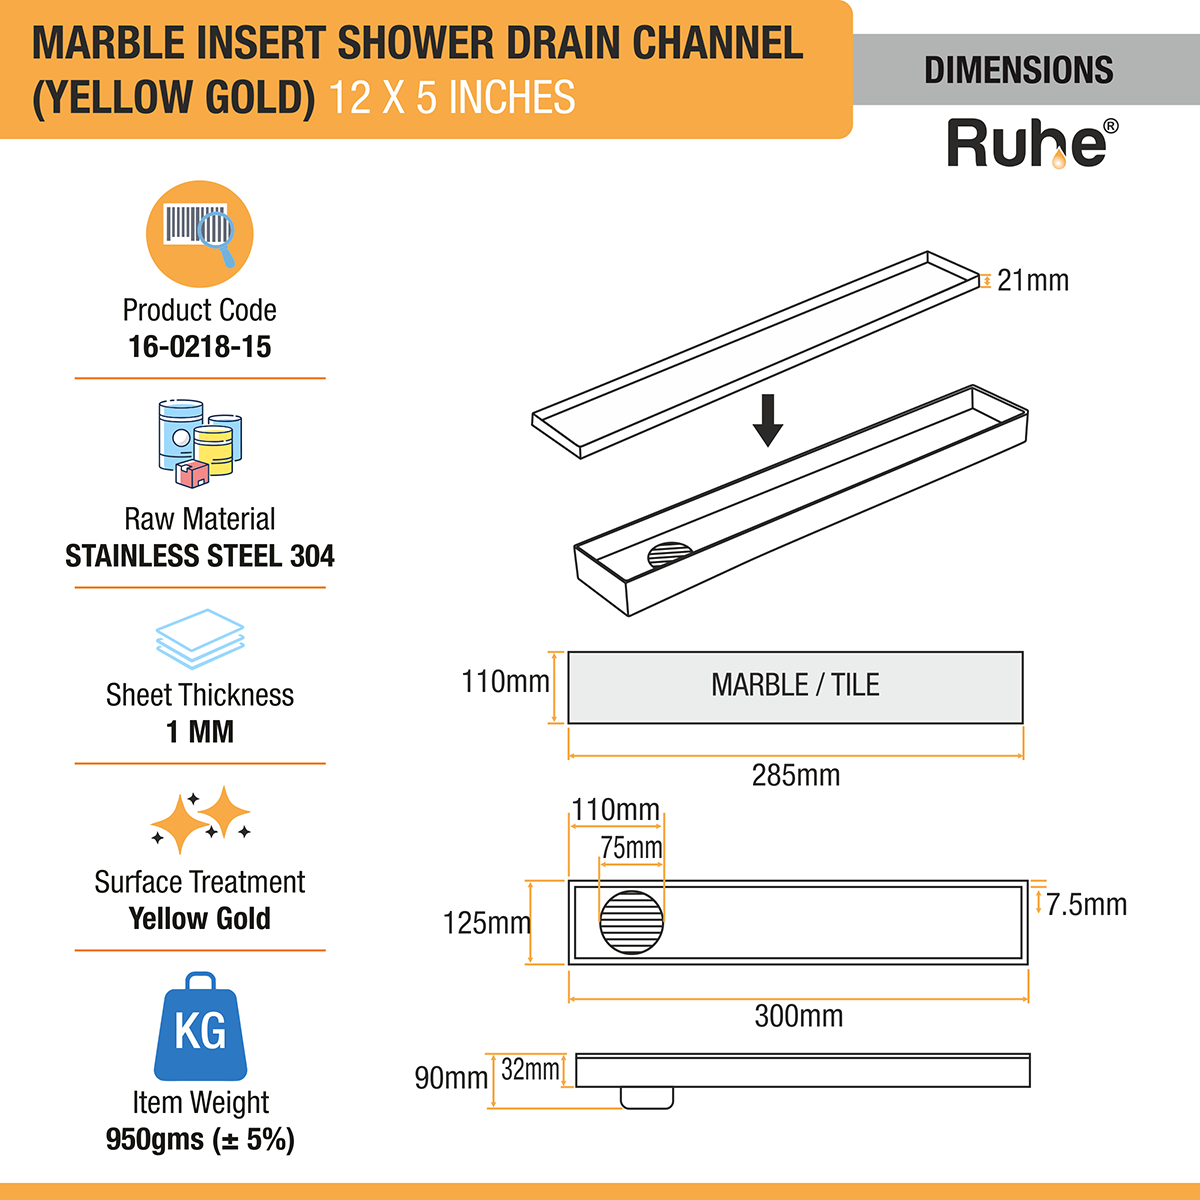 Marble Insert Shower Drain Channel (12 x 5 Inches) YELLOW GOLD PVD Coated dimensions and sizes